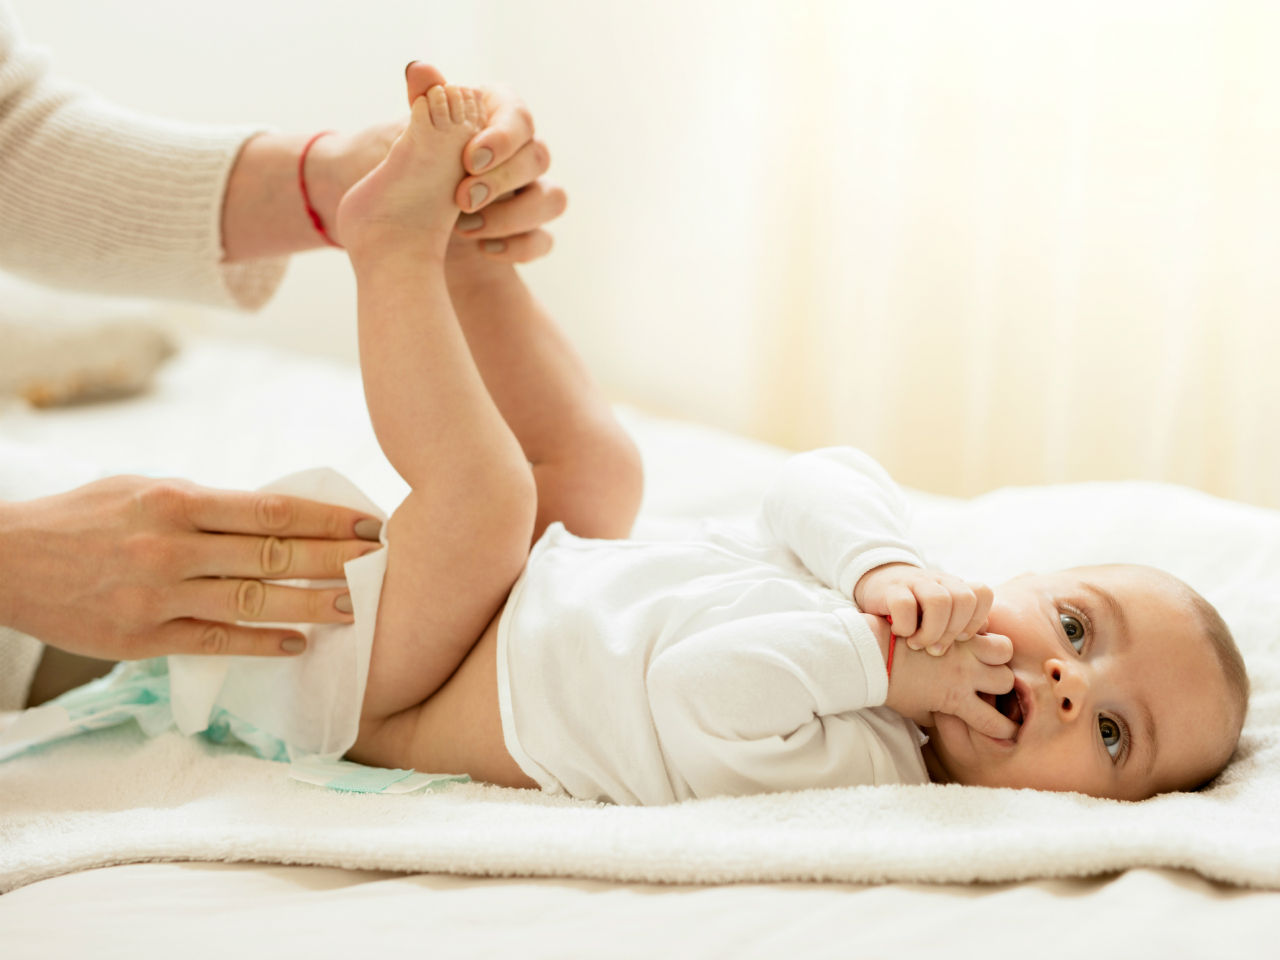 How To Prevent Diaper Blowouts Up The Back